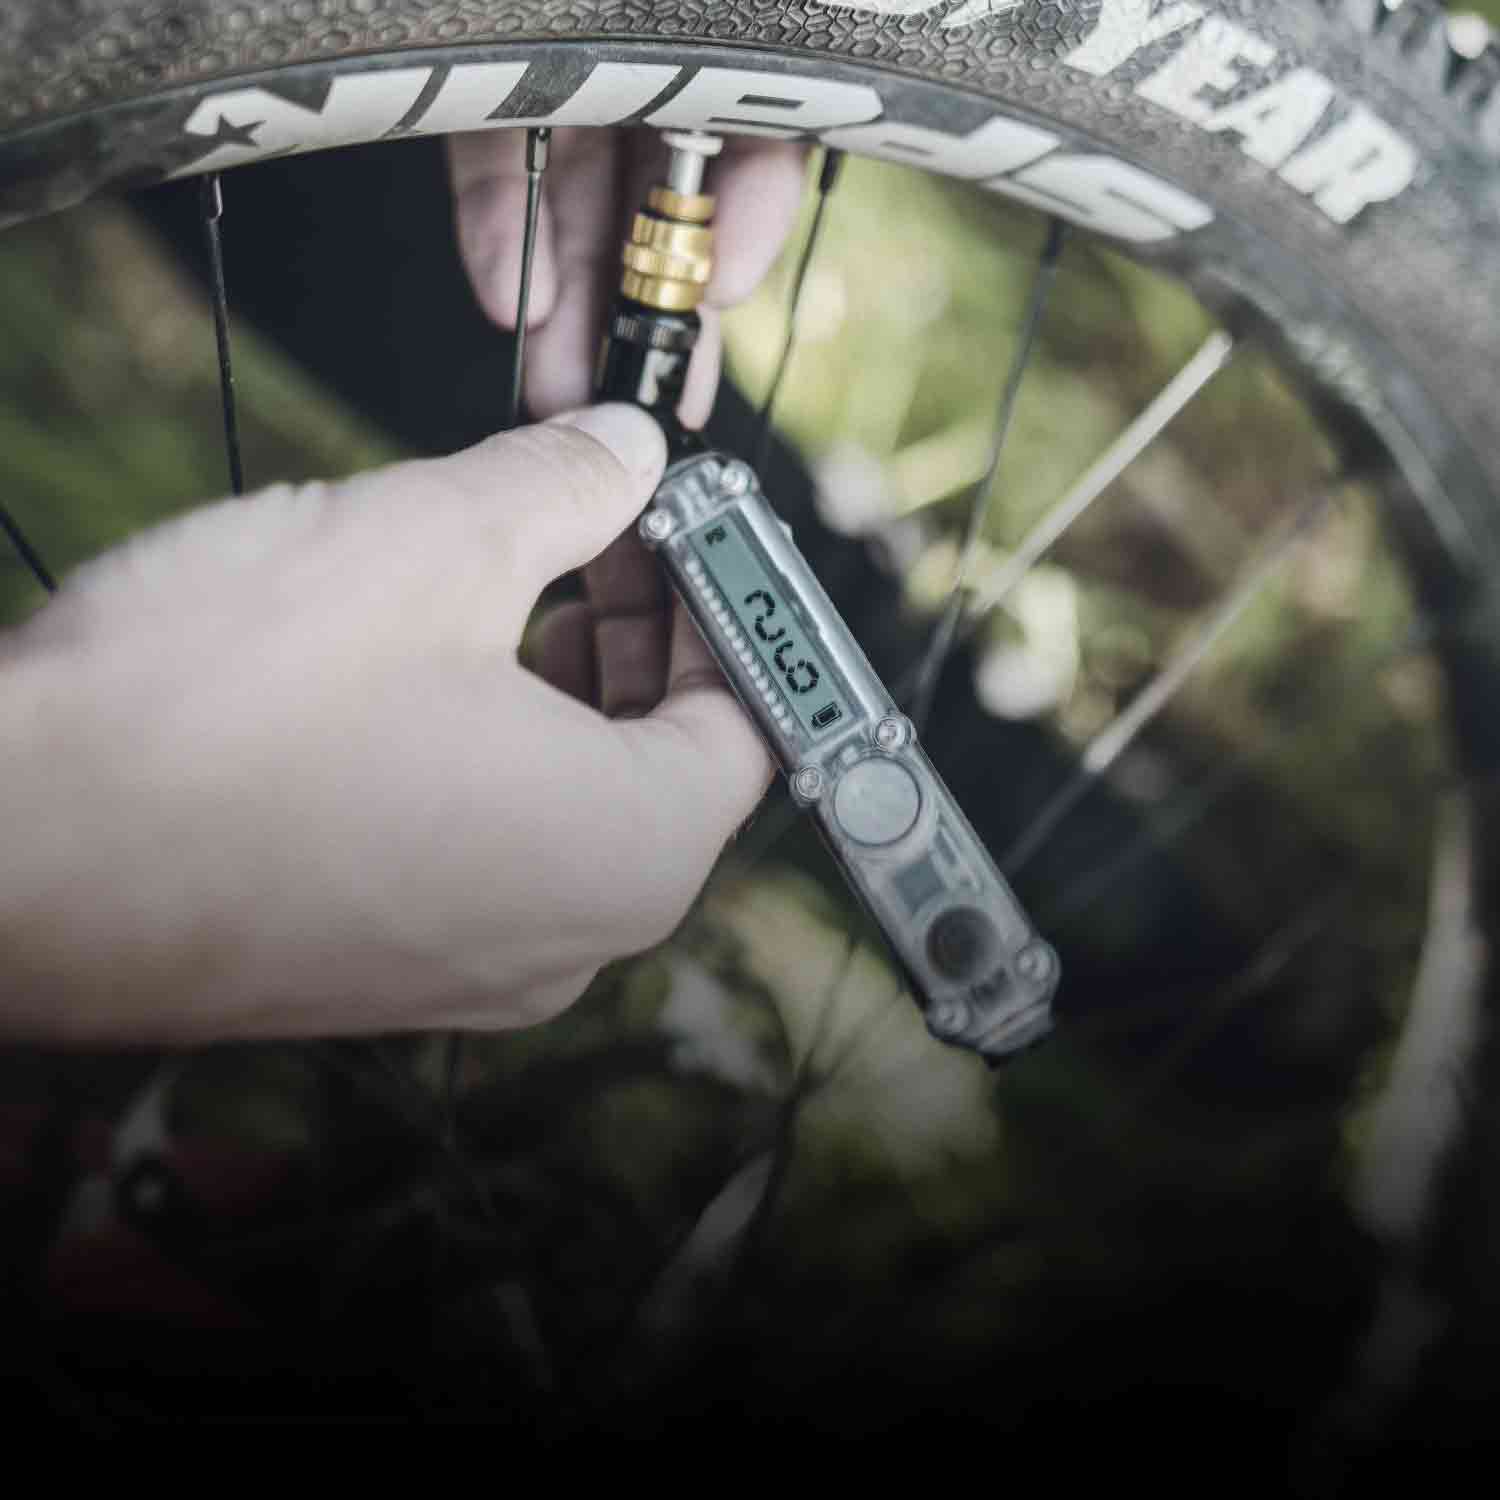 Someone using a digital pressure gauge on a bicycle tire.